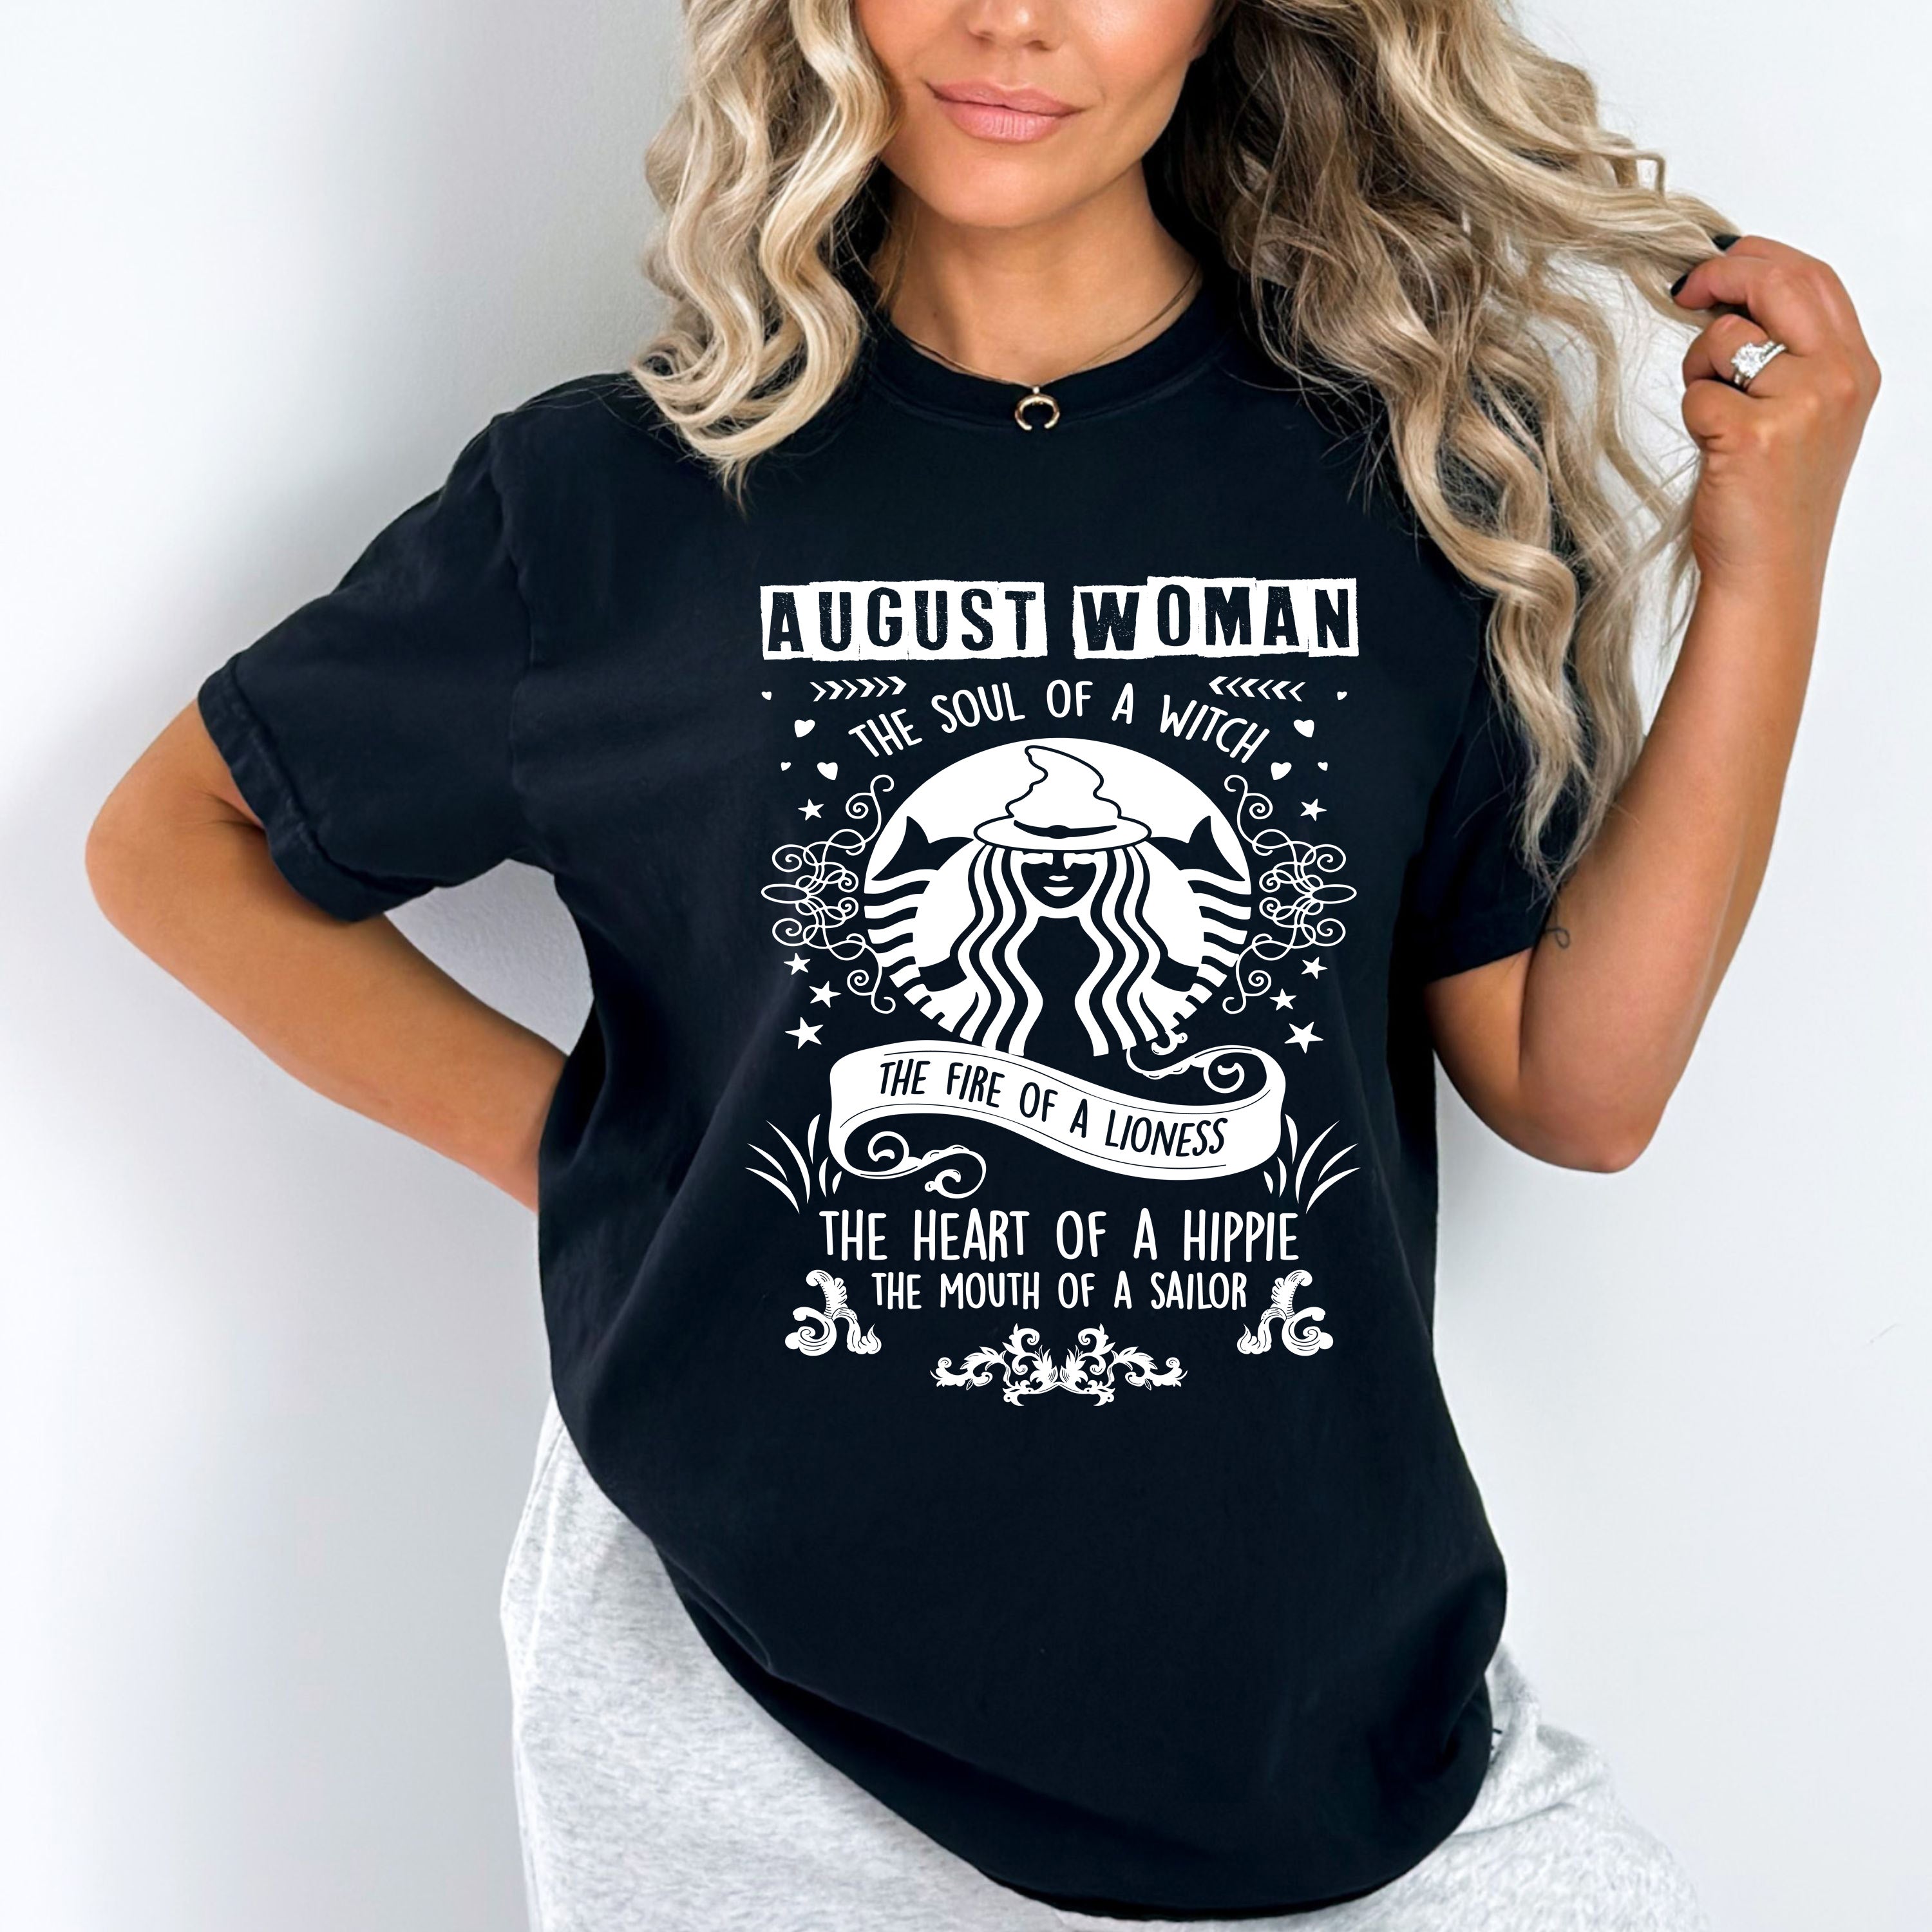 "AUGUST WOMAN The Soul Of A Witch The Fire Of A Lioness The Heart Of A Hippie...",T-Shirt.